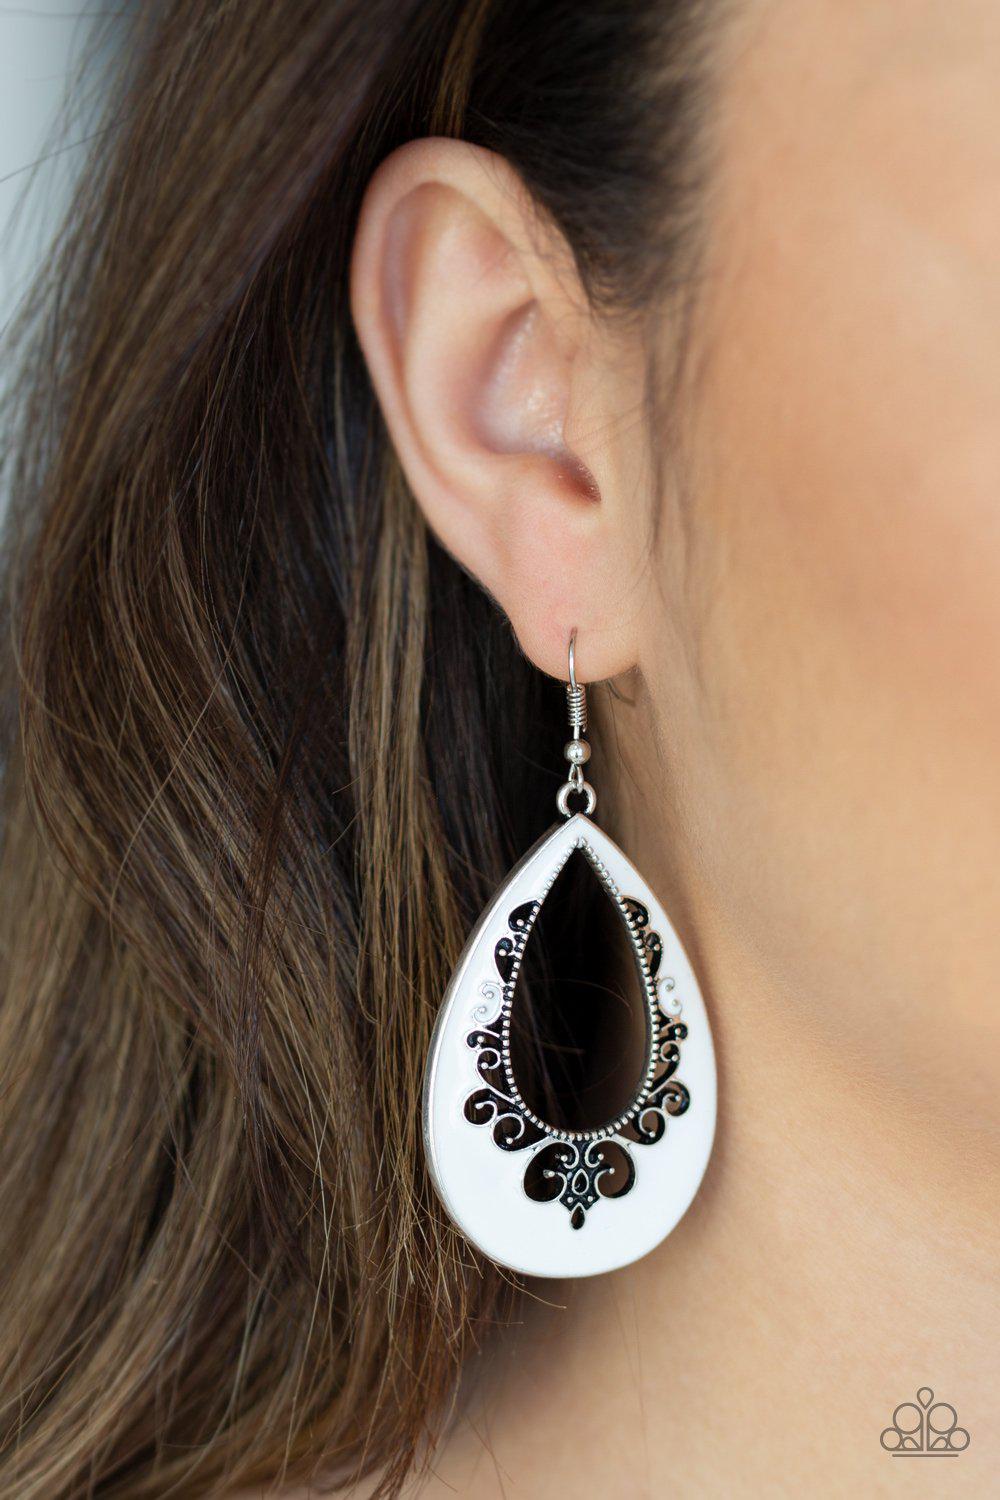 Compliments To The CHIC White Earrings - Paparazzi Accessories - model -CarasShop.com - $5 Jewelry by Cara Jewels